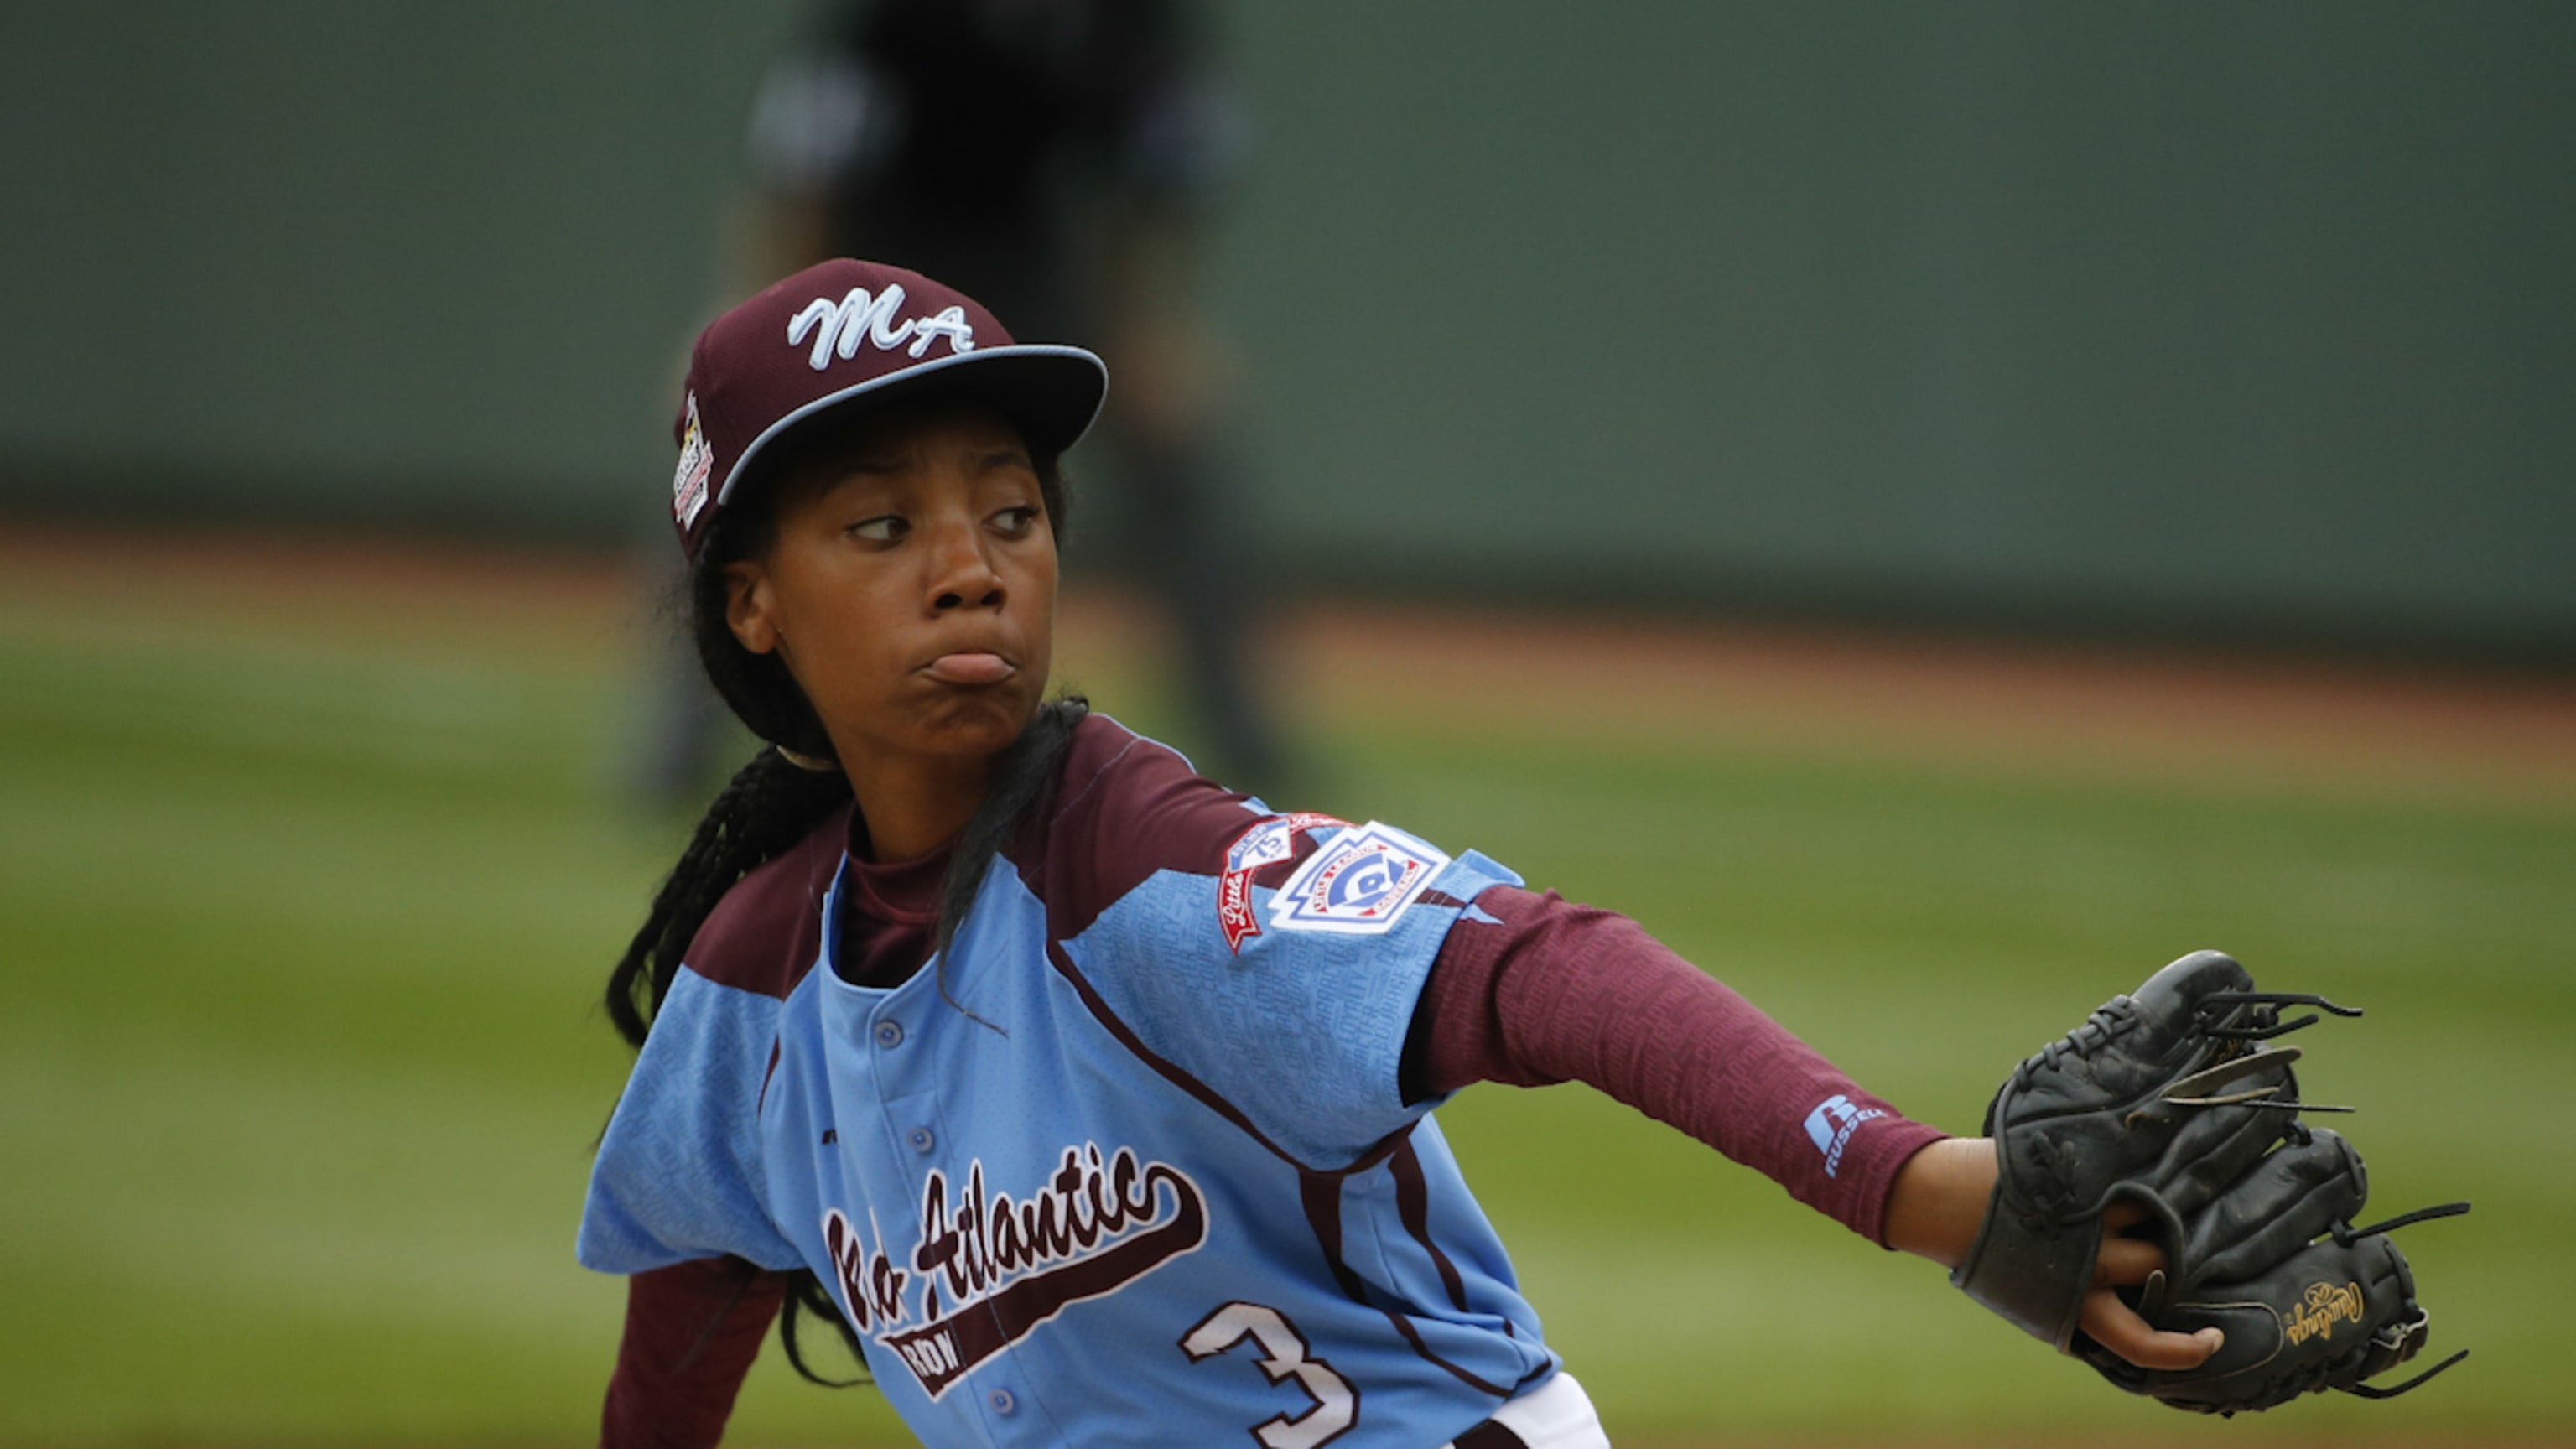 Mo'ne Davis: Expect to see more girls playing Little League